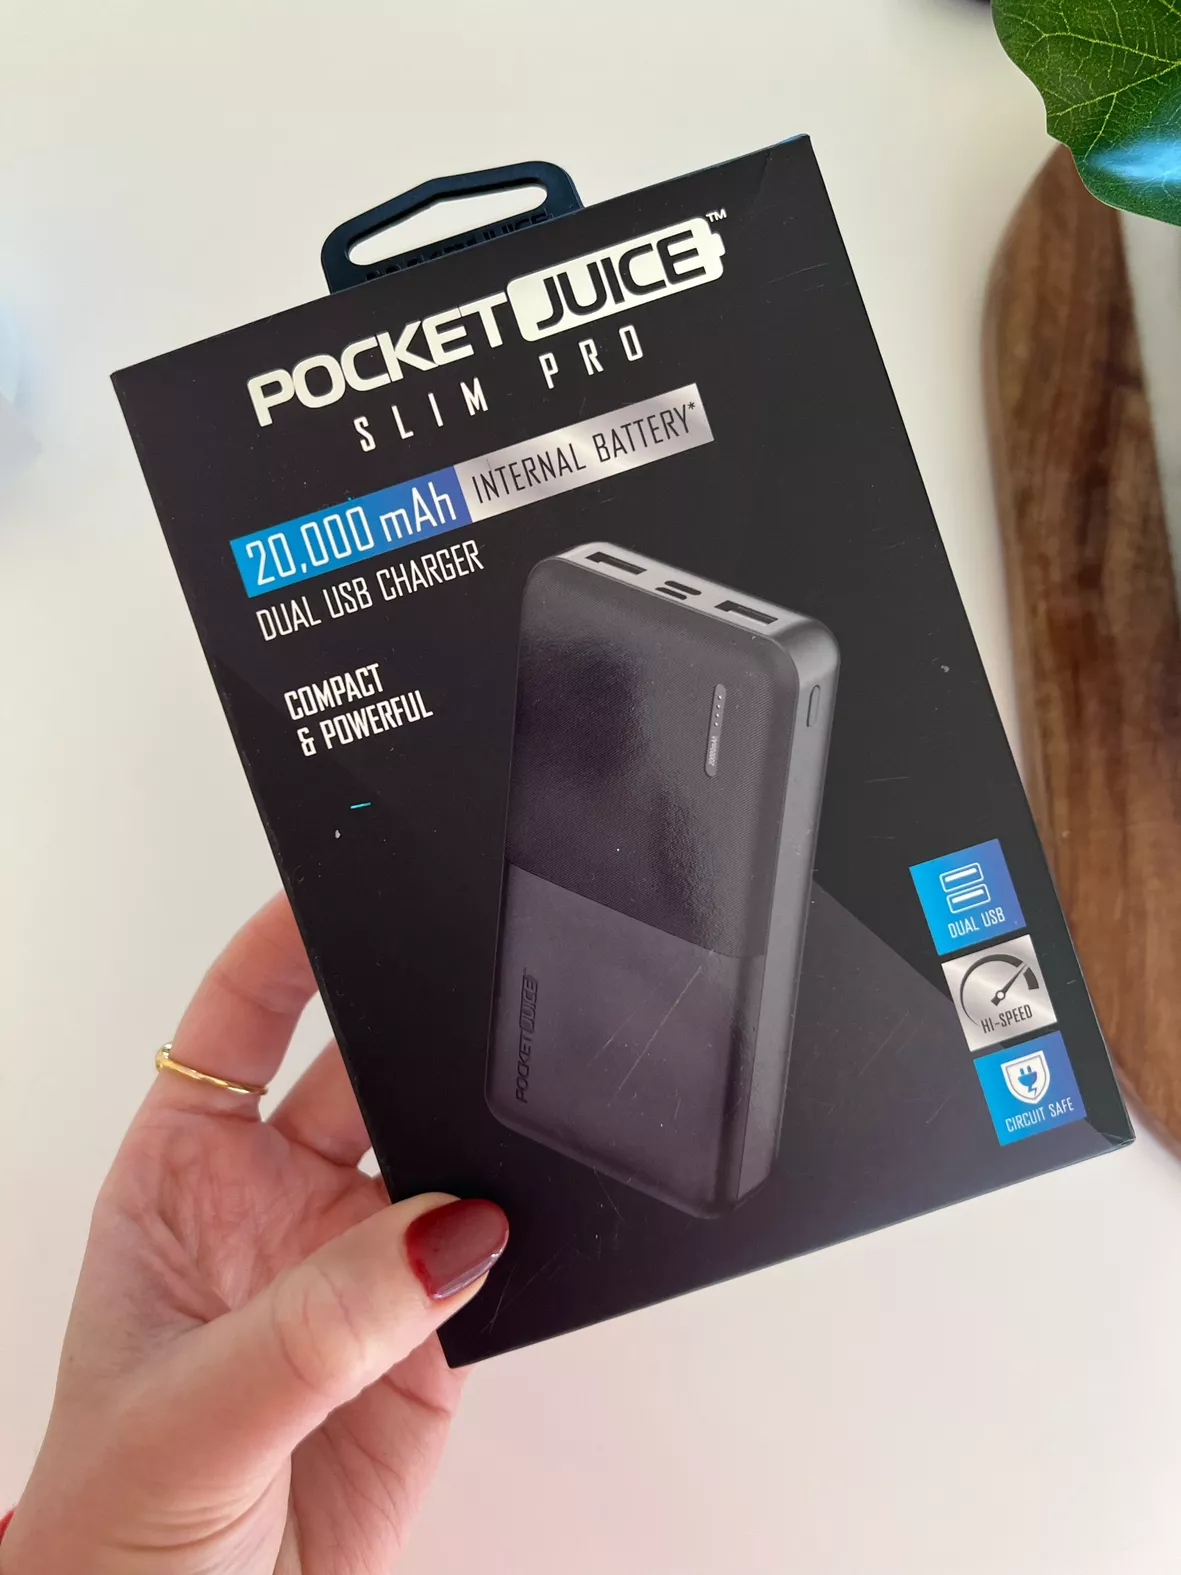 Pocket Juice Slim Pro 20,000mAh, Portable Power Bank and Charger with Dual  USB Ports, Black